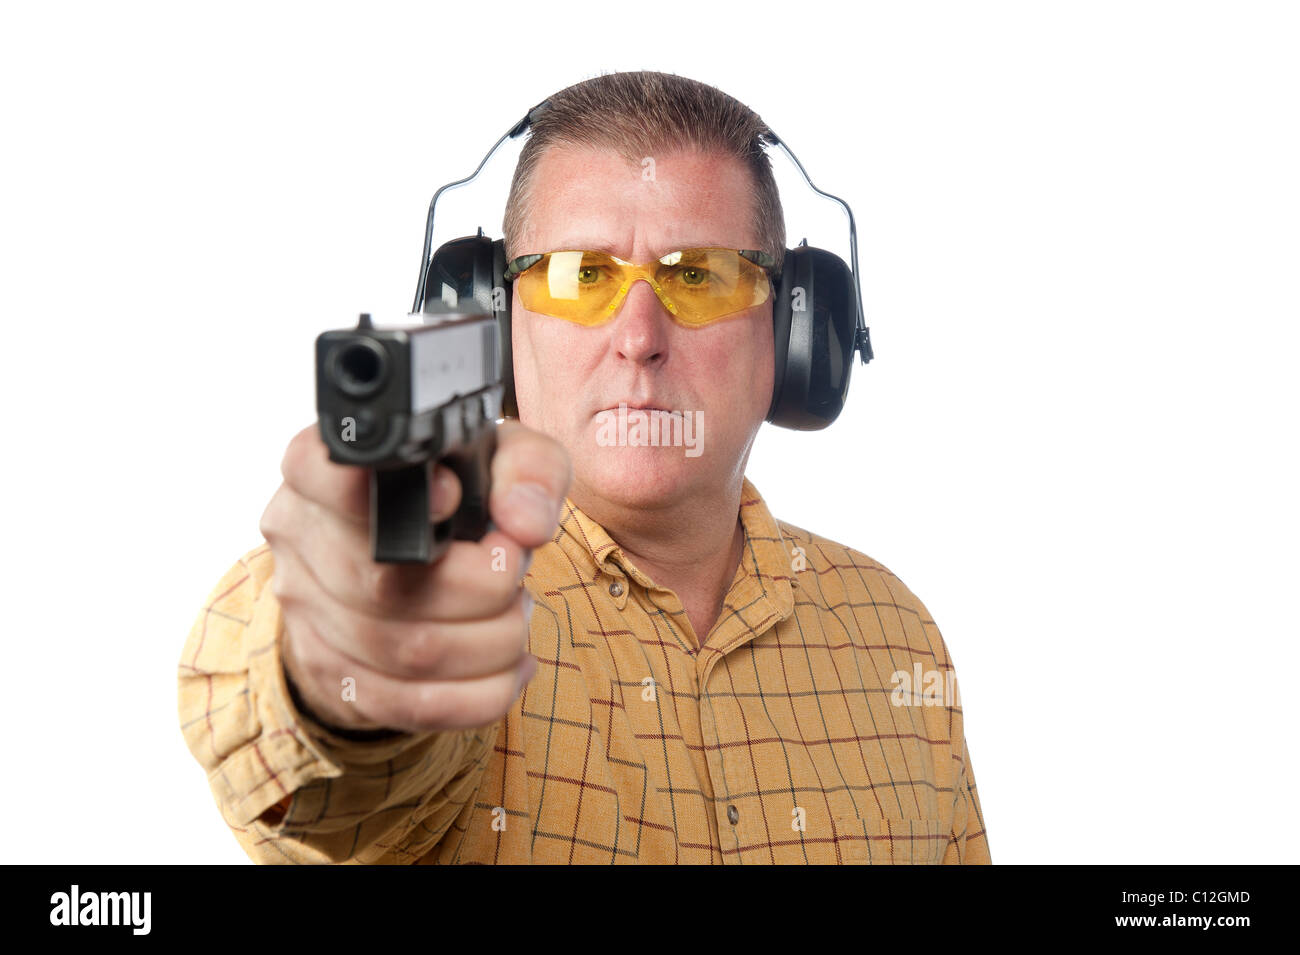 A man aims a handgun while wearing proper safety equipment such as safety glasses and hearing protection. Stock Photo